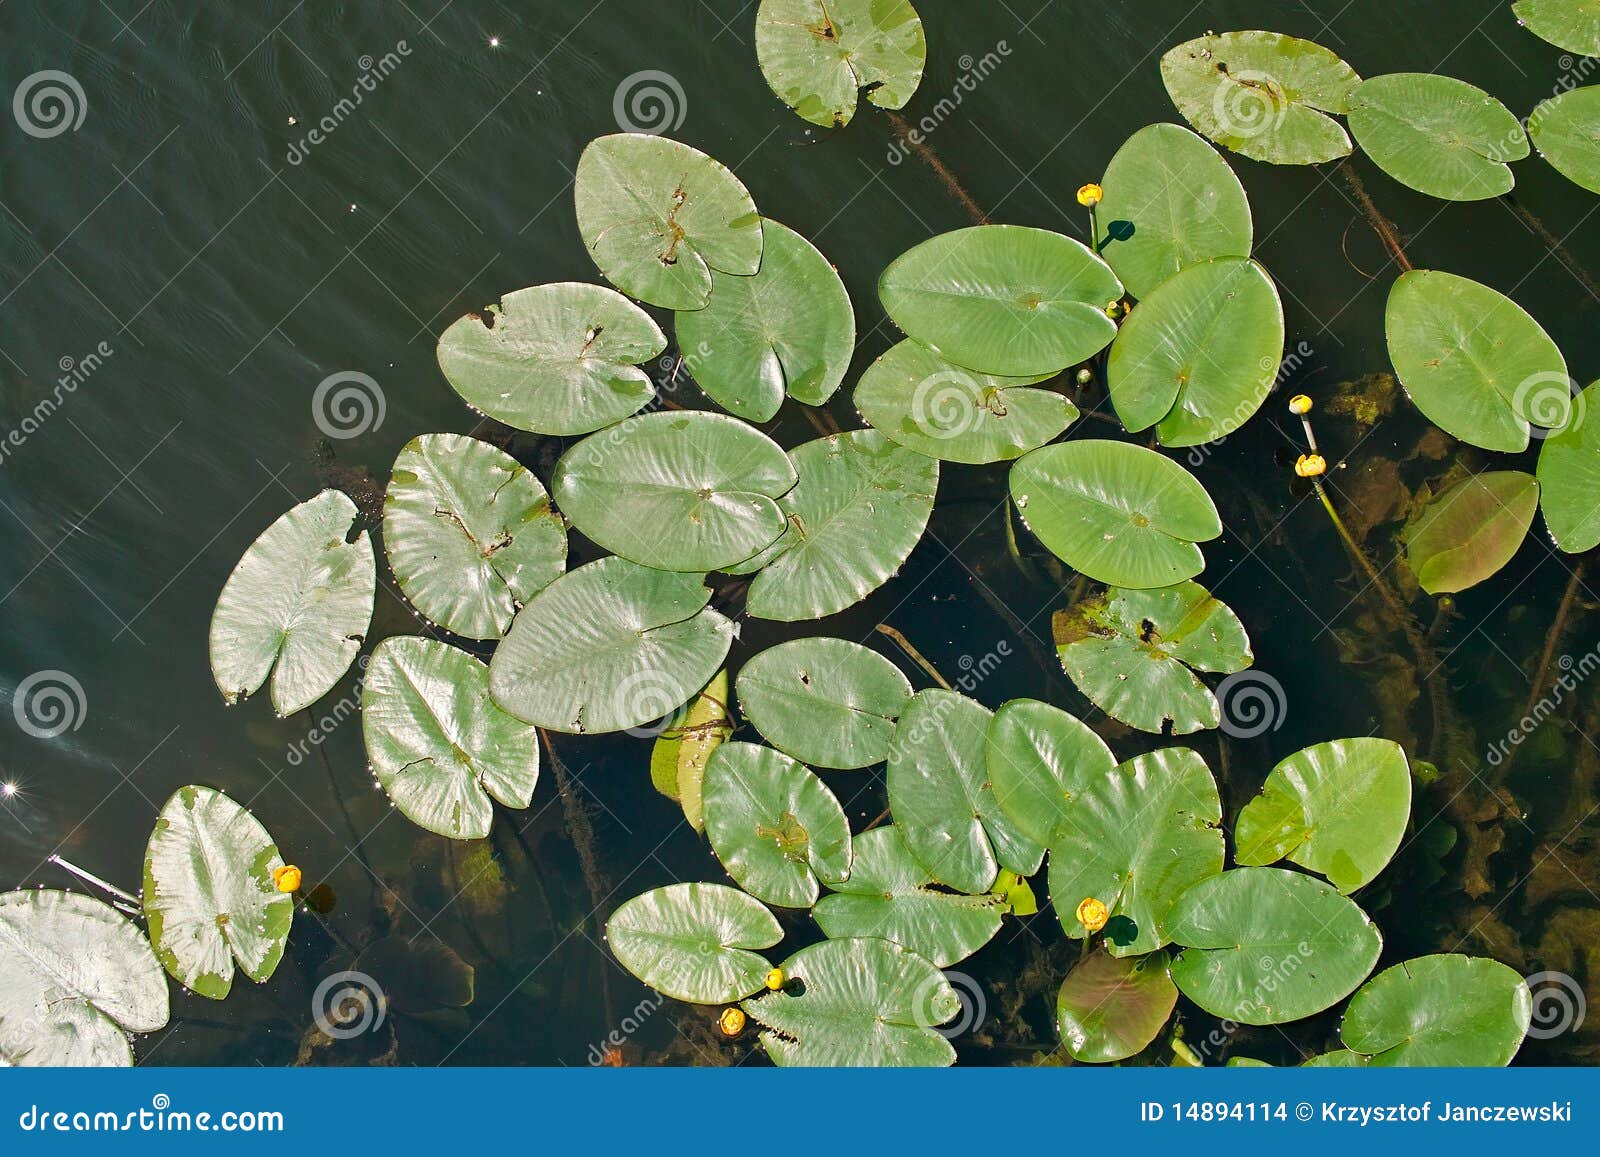 Leaves on the water. stock photo. Image of outdoors, lake - 14894114